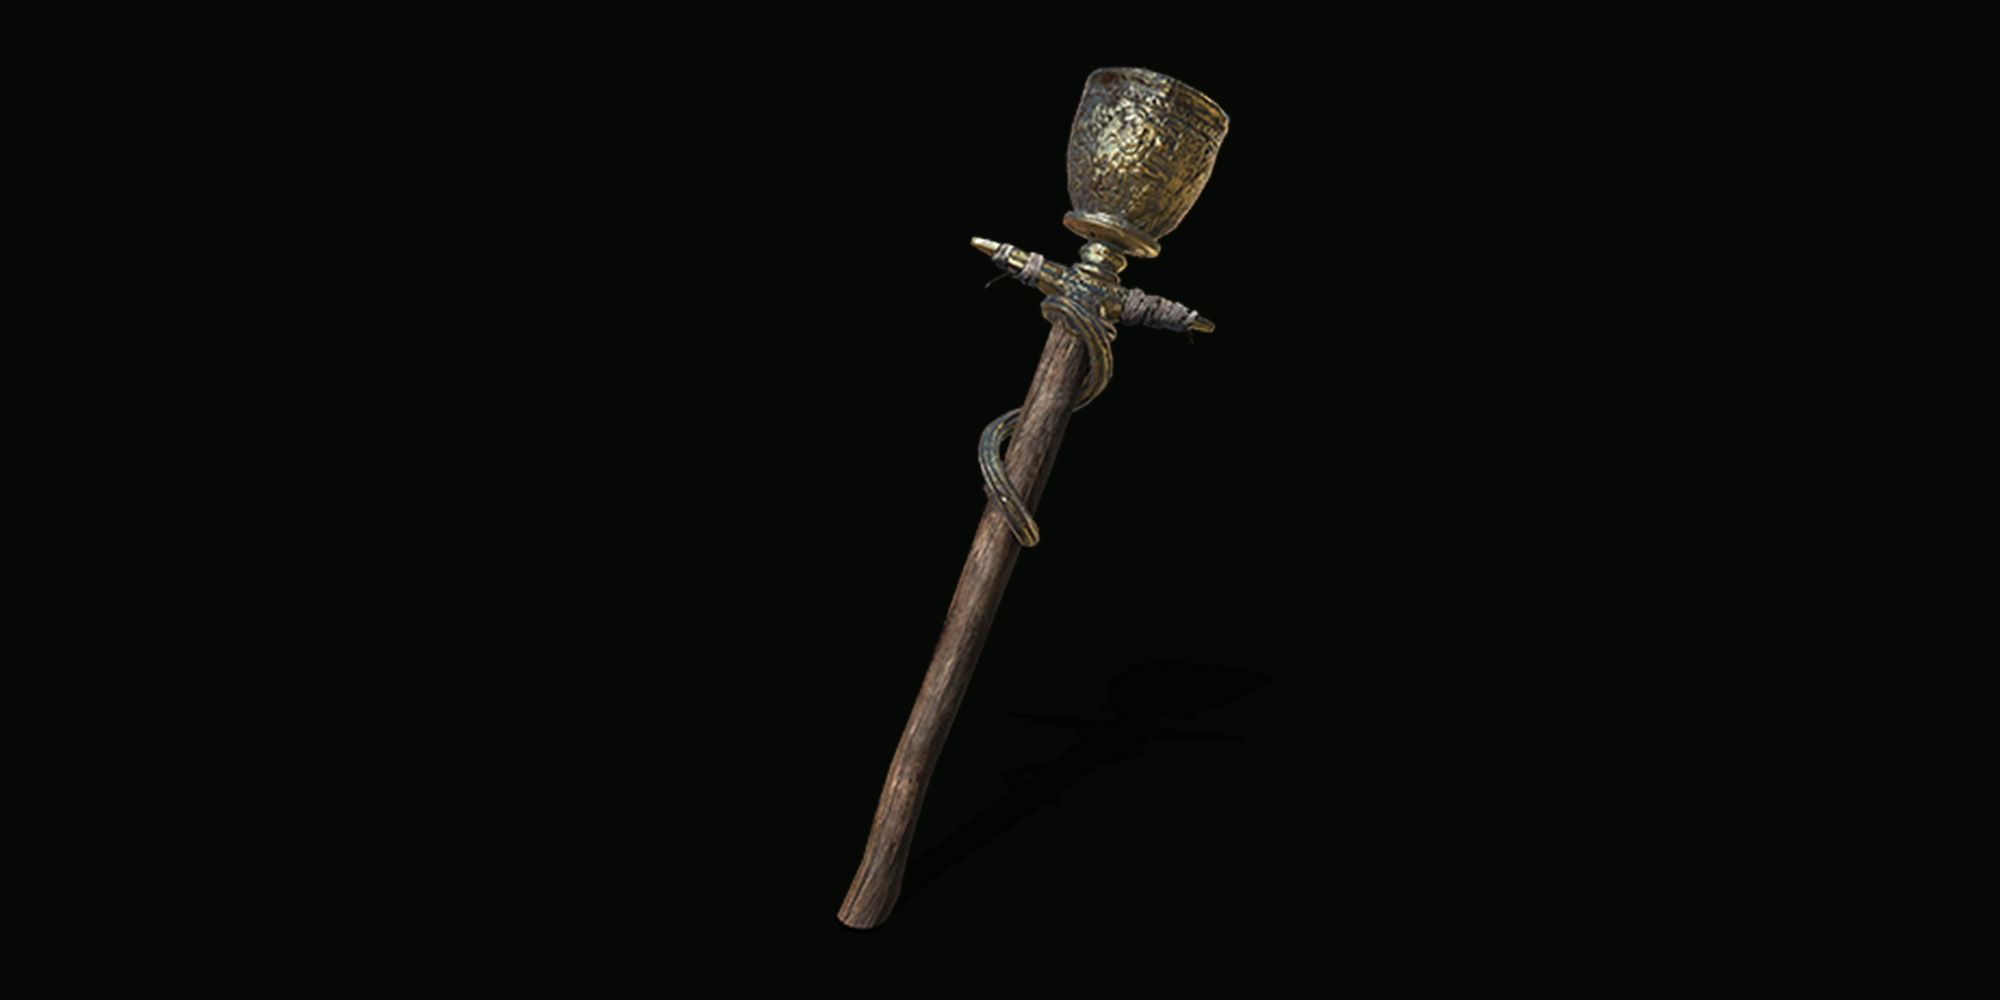 Mendicant's Staff from Dark Souls 3